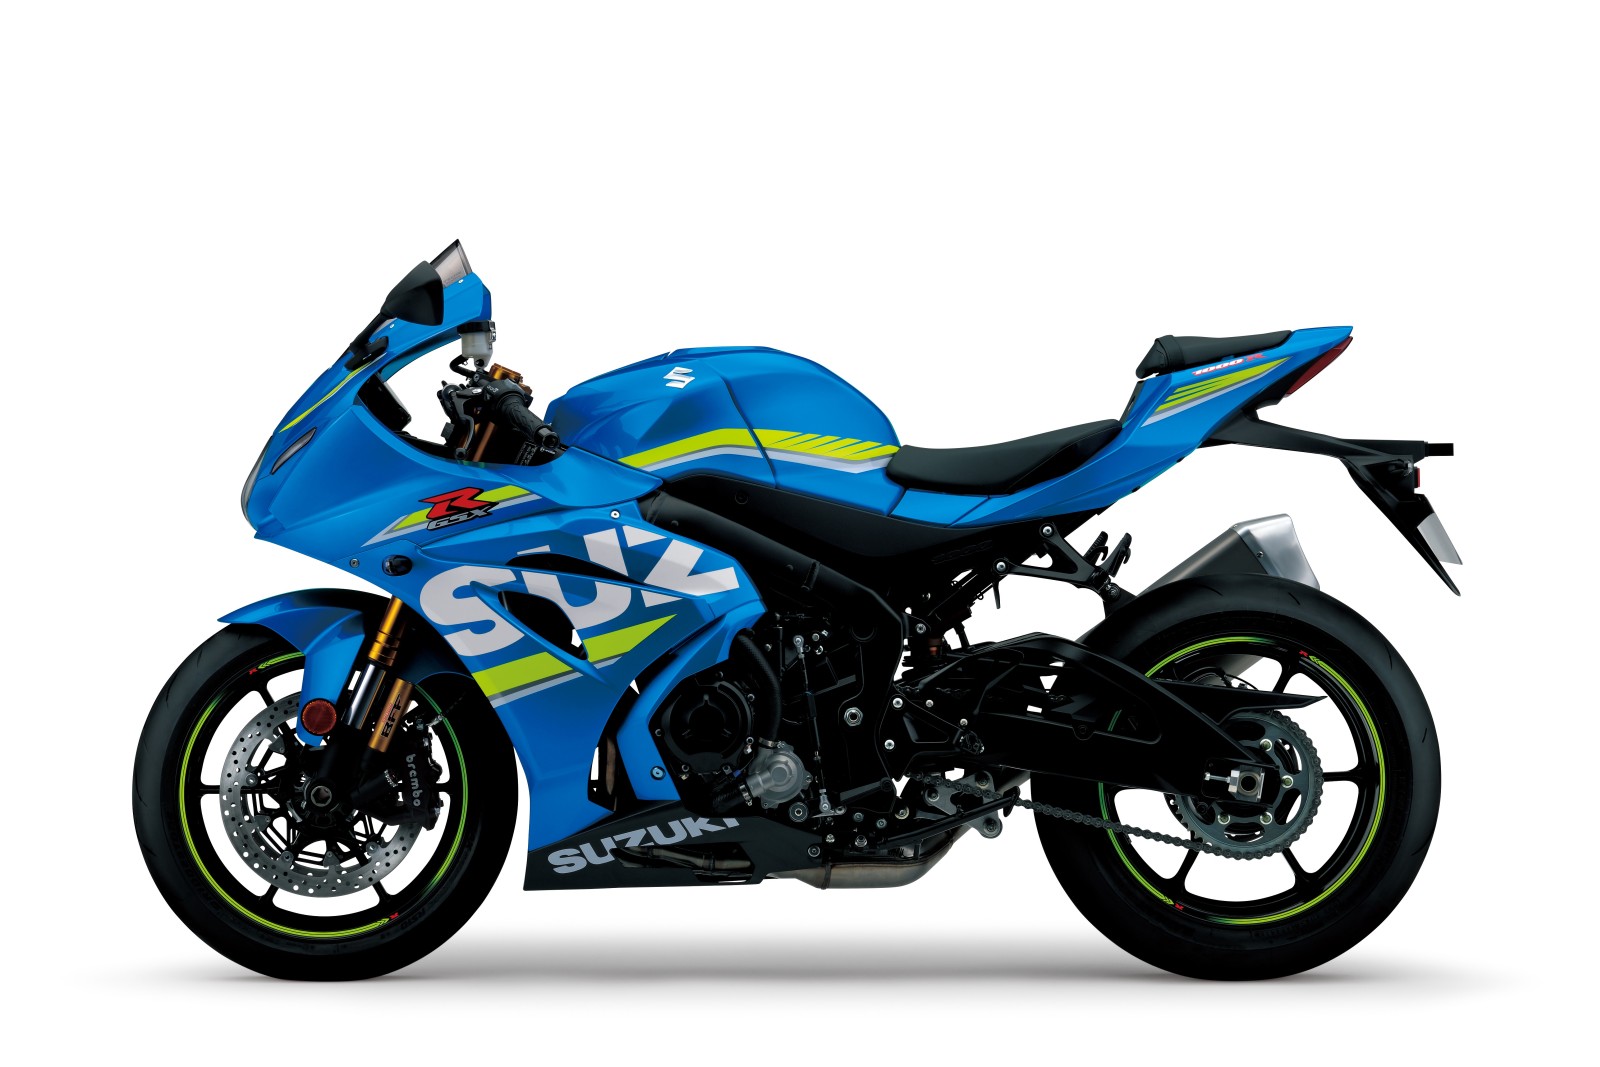 New 2017 Suzuki GSXR1000 and GSXR1000R Launched In India